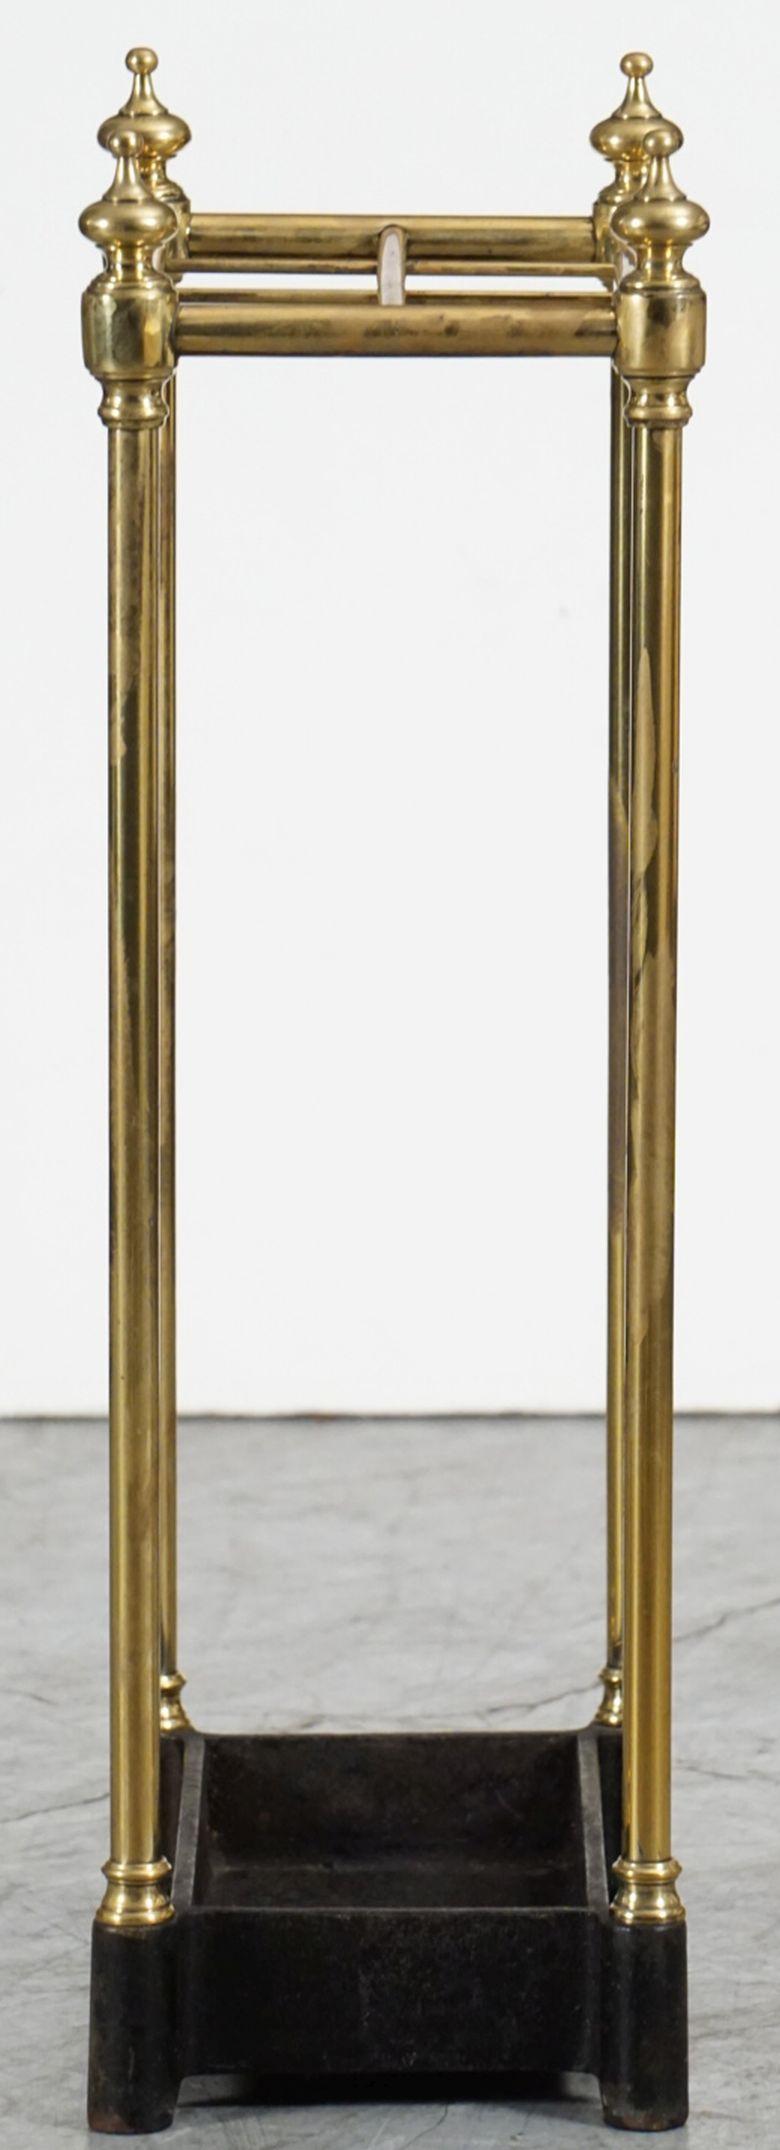 20th Century English Brass Umbrella or Stick Stand with Cast Iron Base For Sale